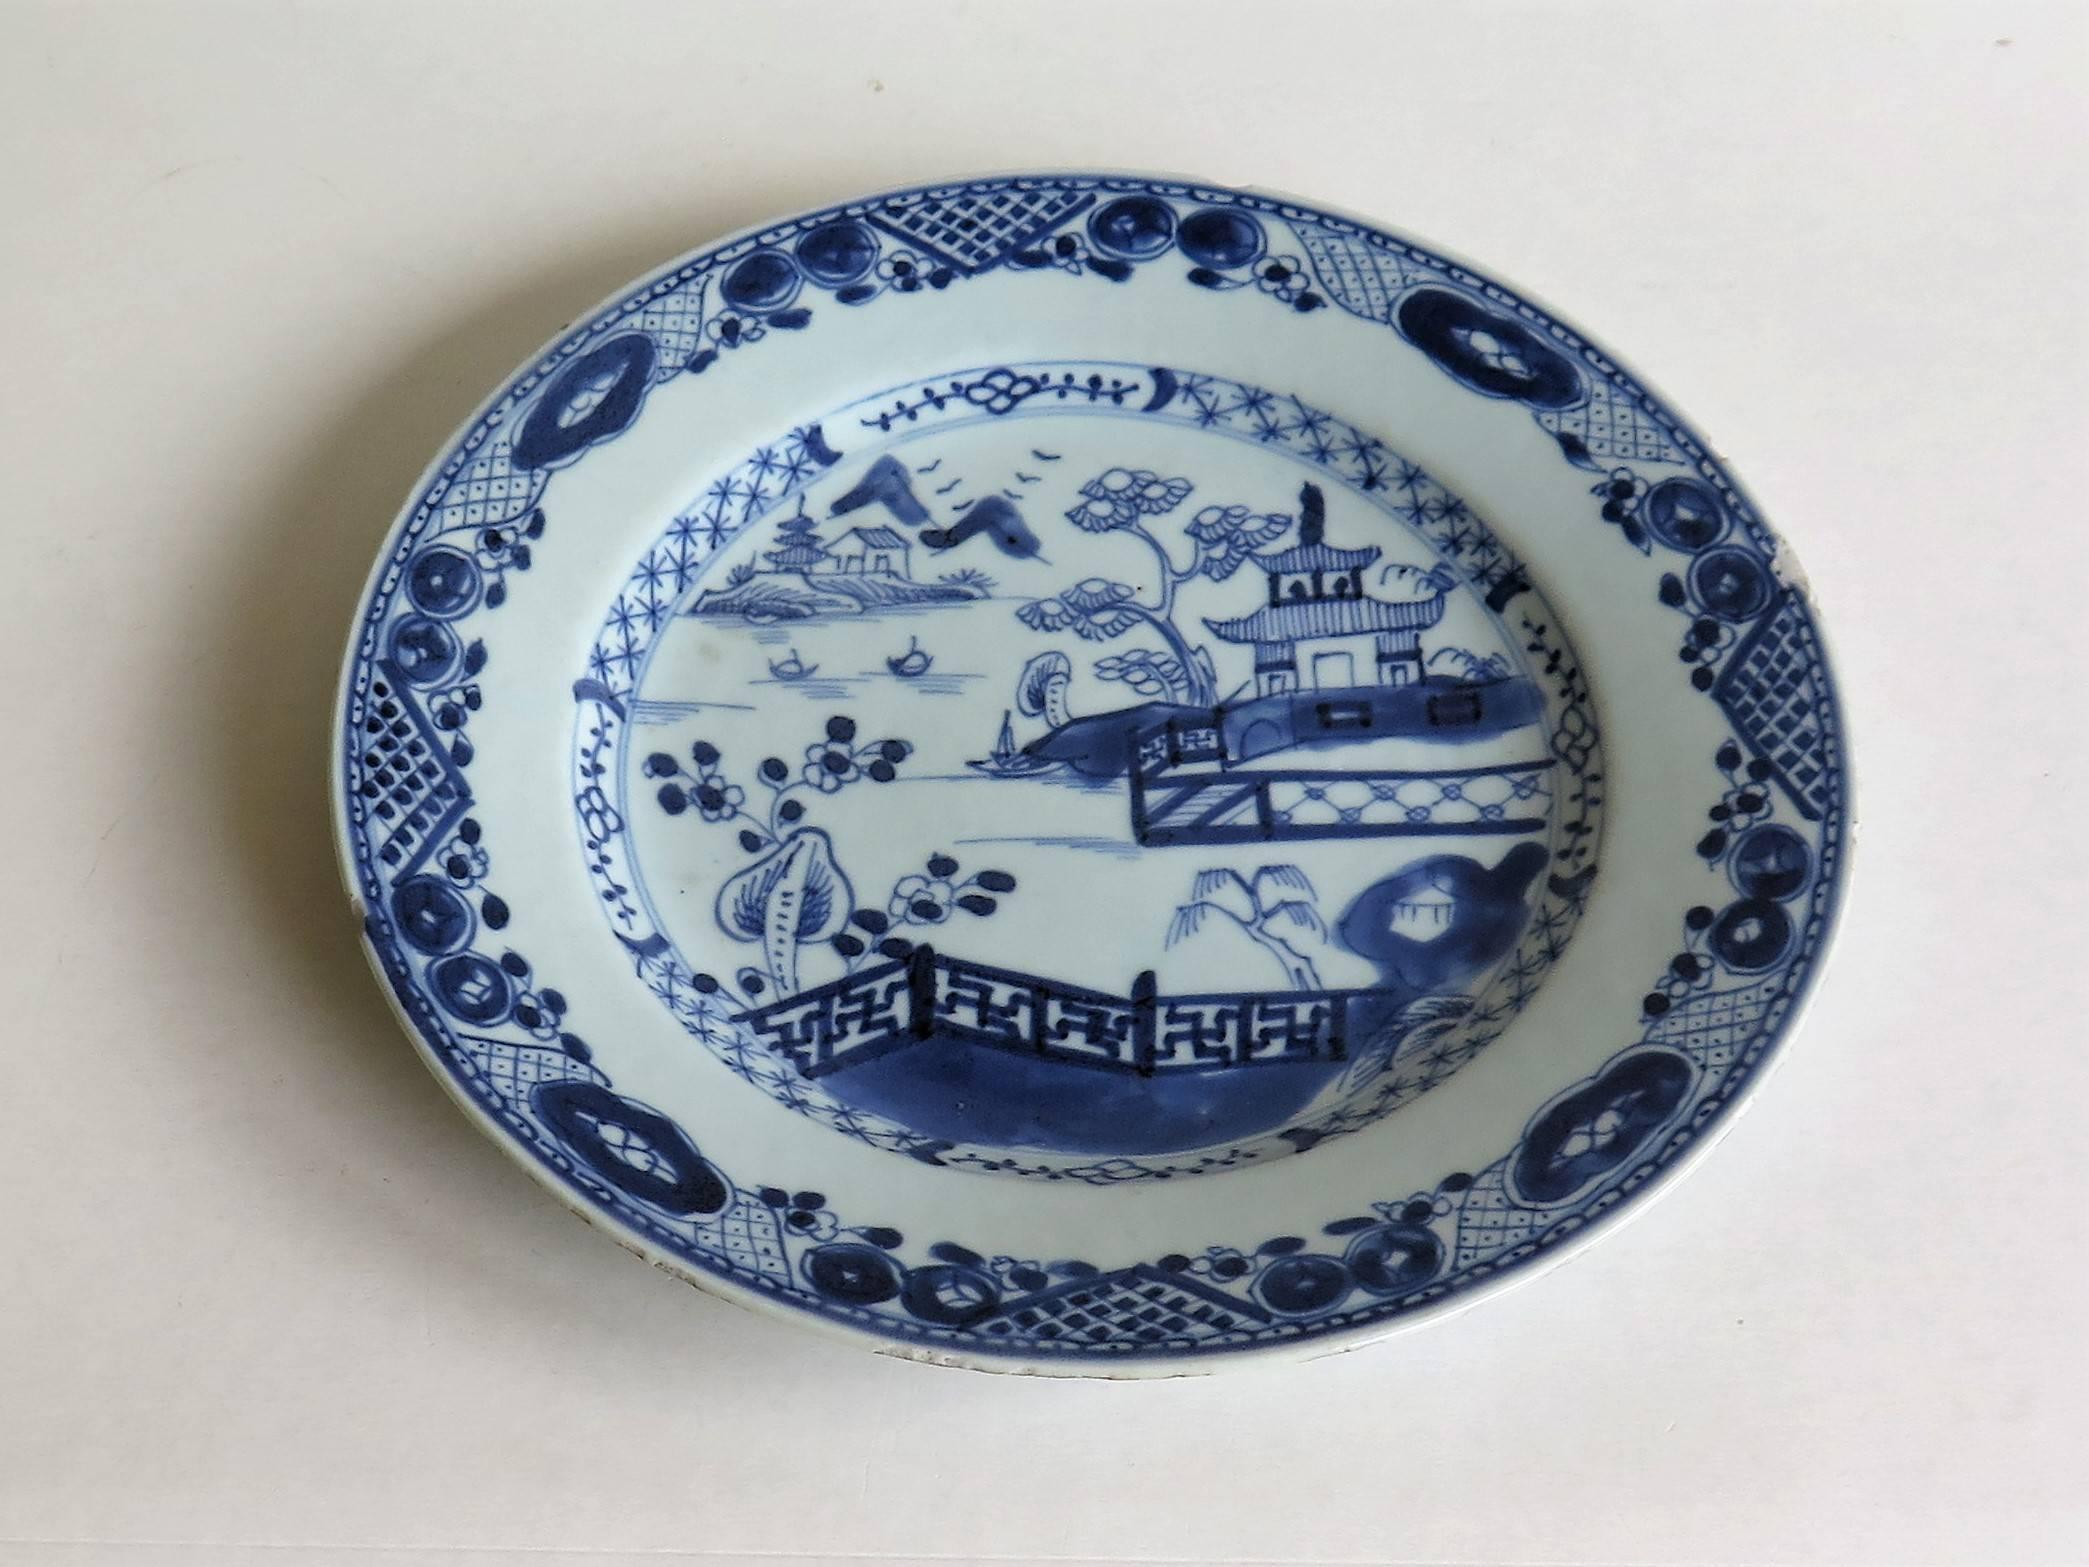 Qing 18th Century Chinese Blue and White Porcelain Plate, Lakeside Scene, circa 1780